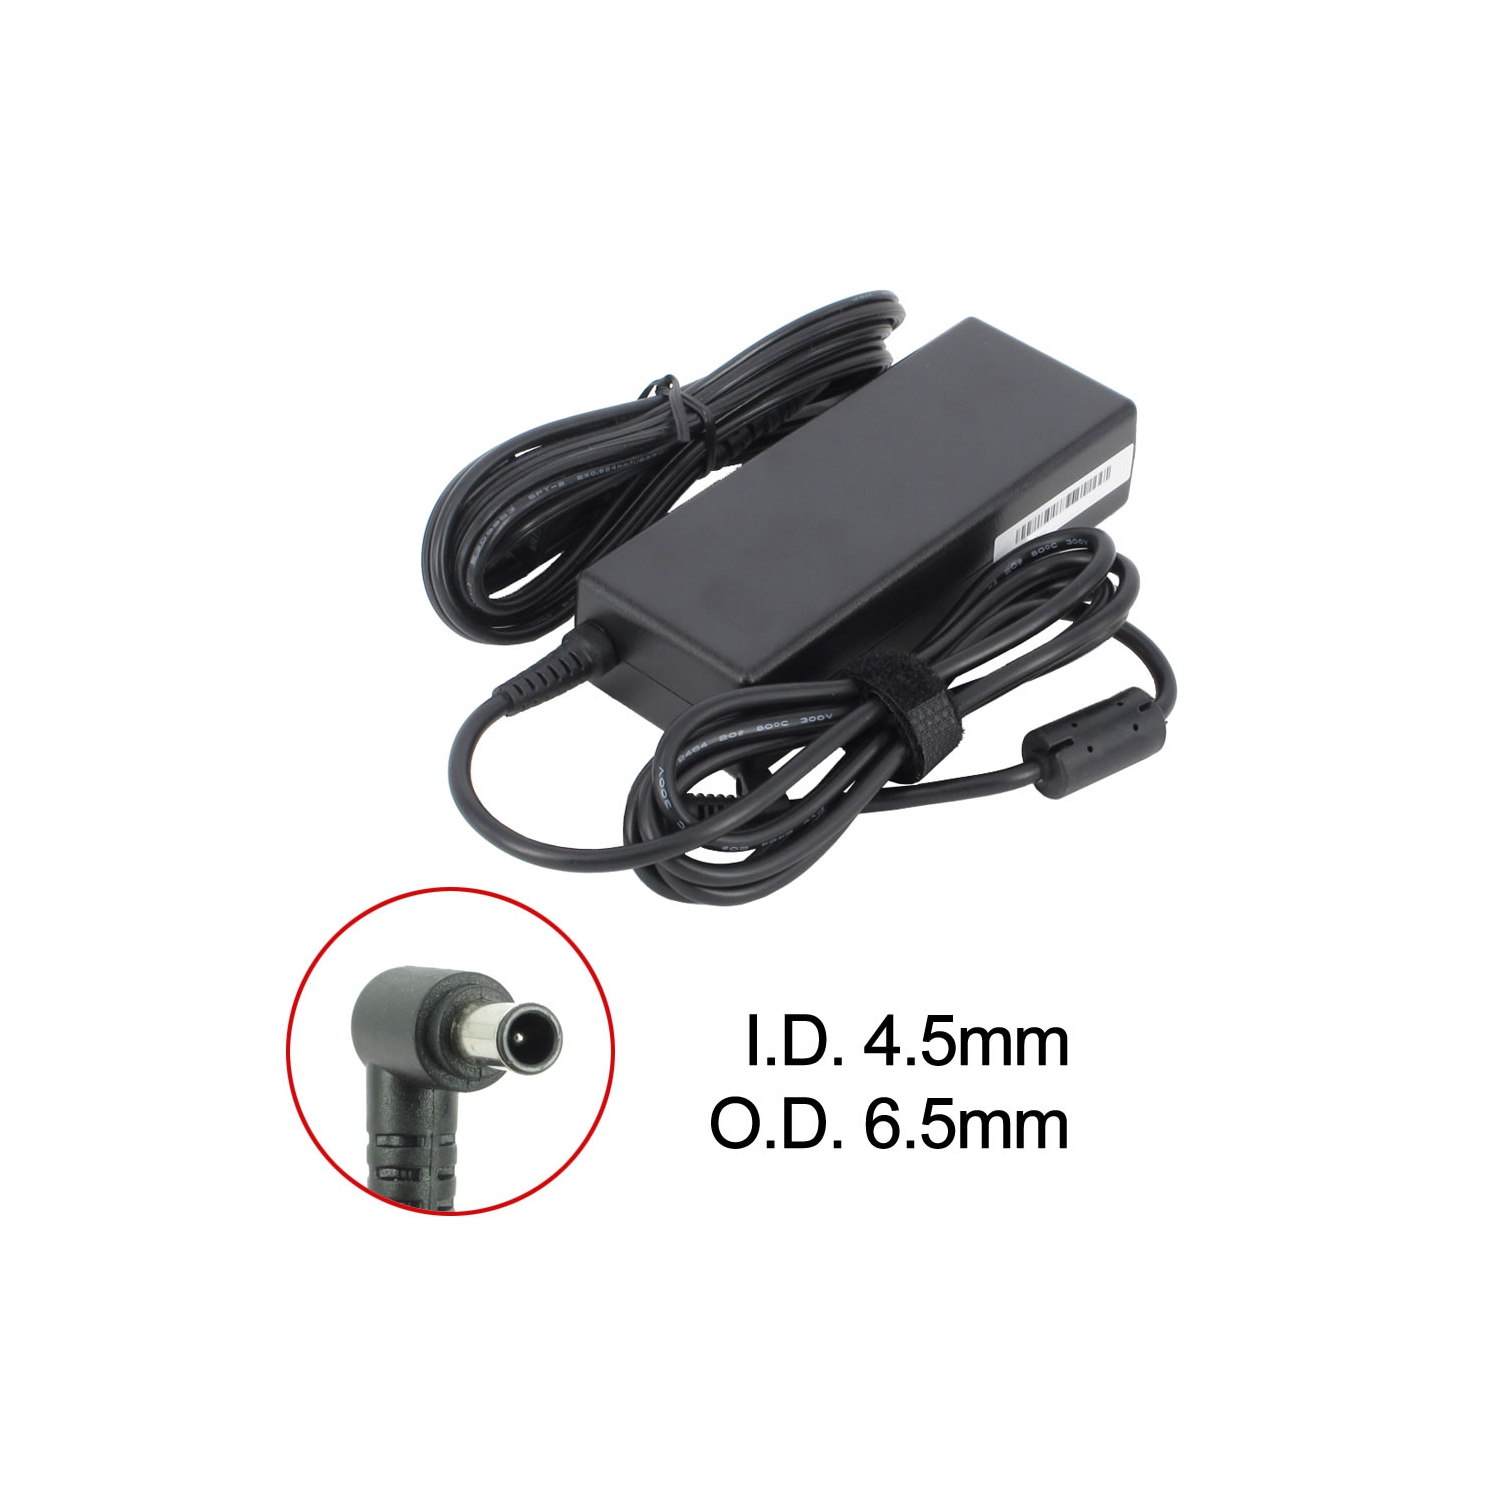 Brand New Laptop AC Adapter for Sony VAIO VGN-BZ563P30, PCGA-AC19V1, PCGA-AC19V23, VGP-AC19V19, VGP-AC19V27, VGP-AC19V48